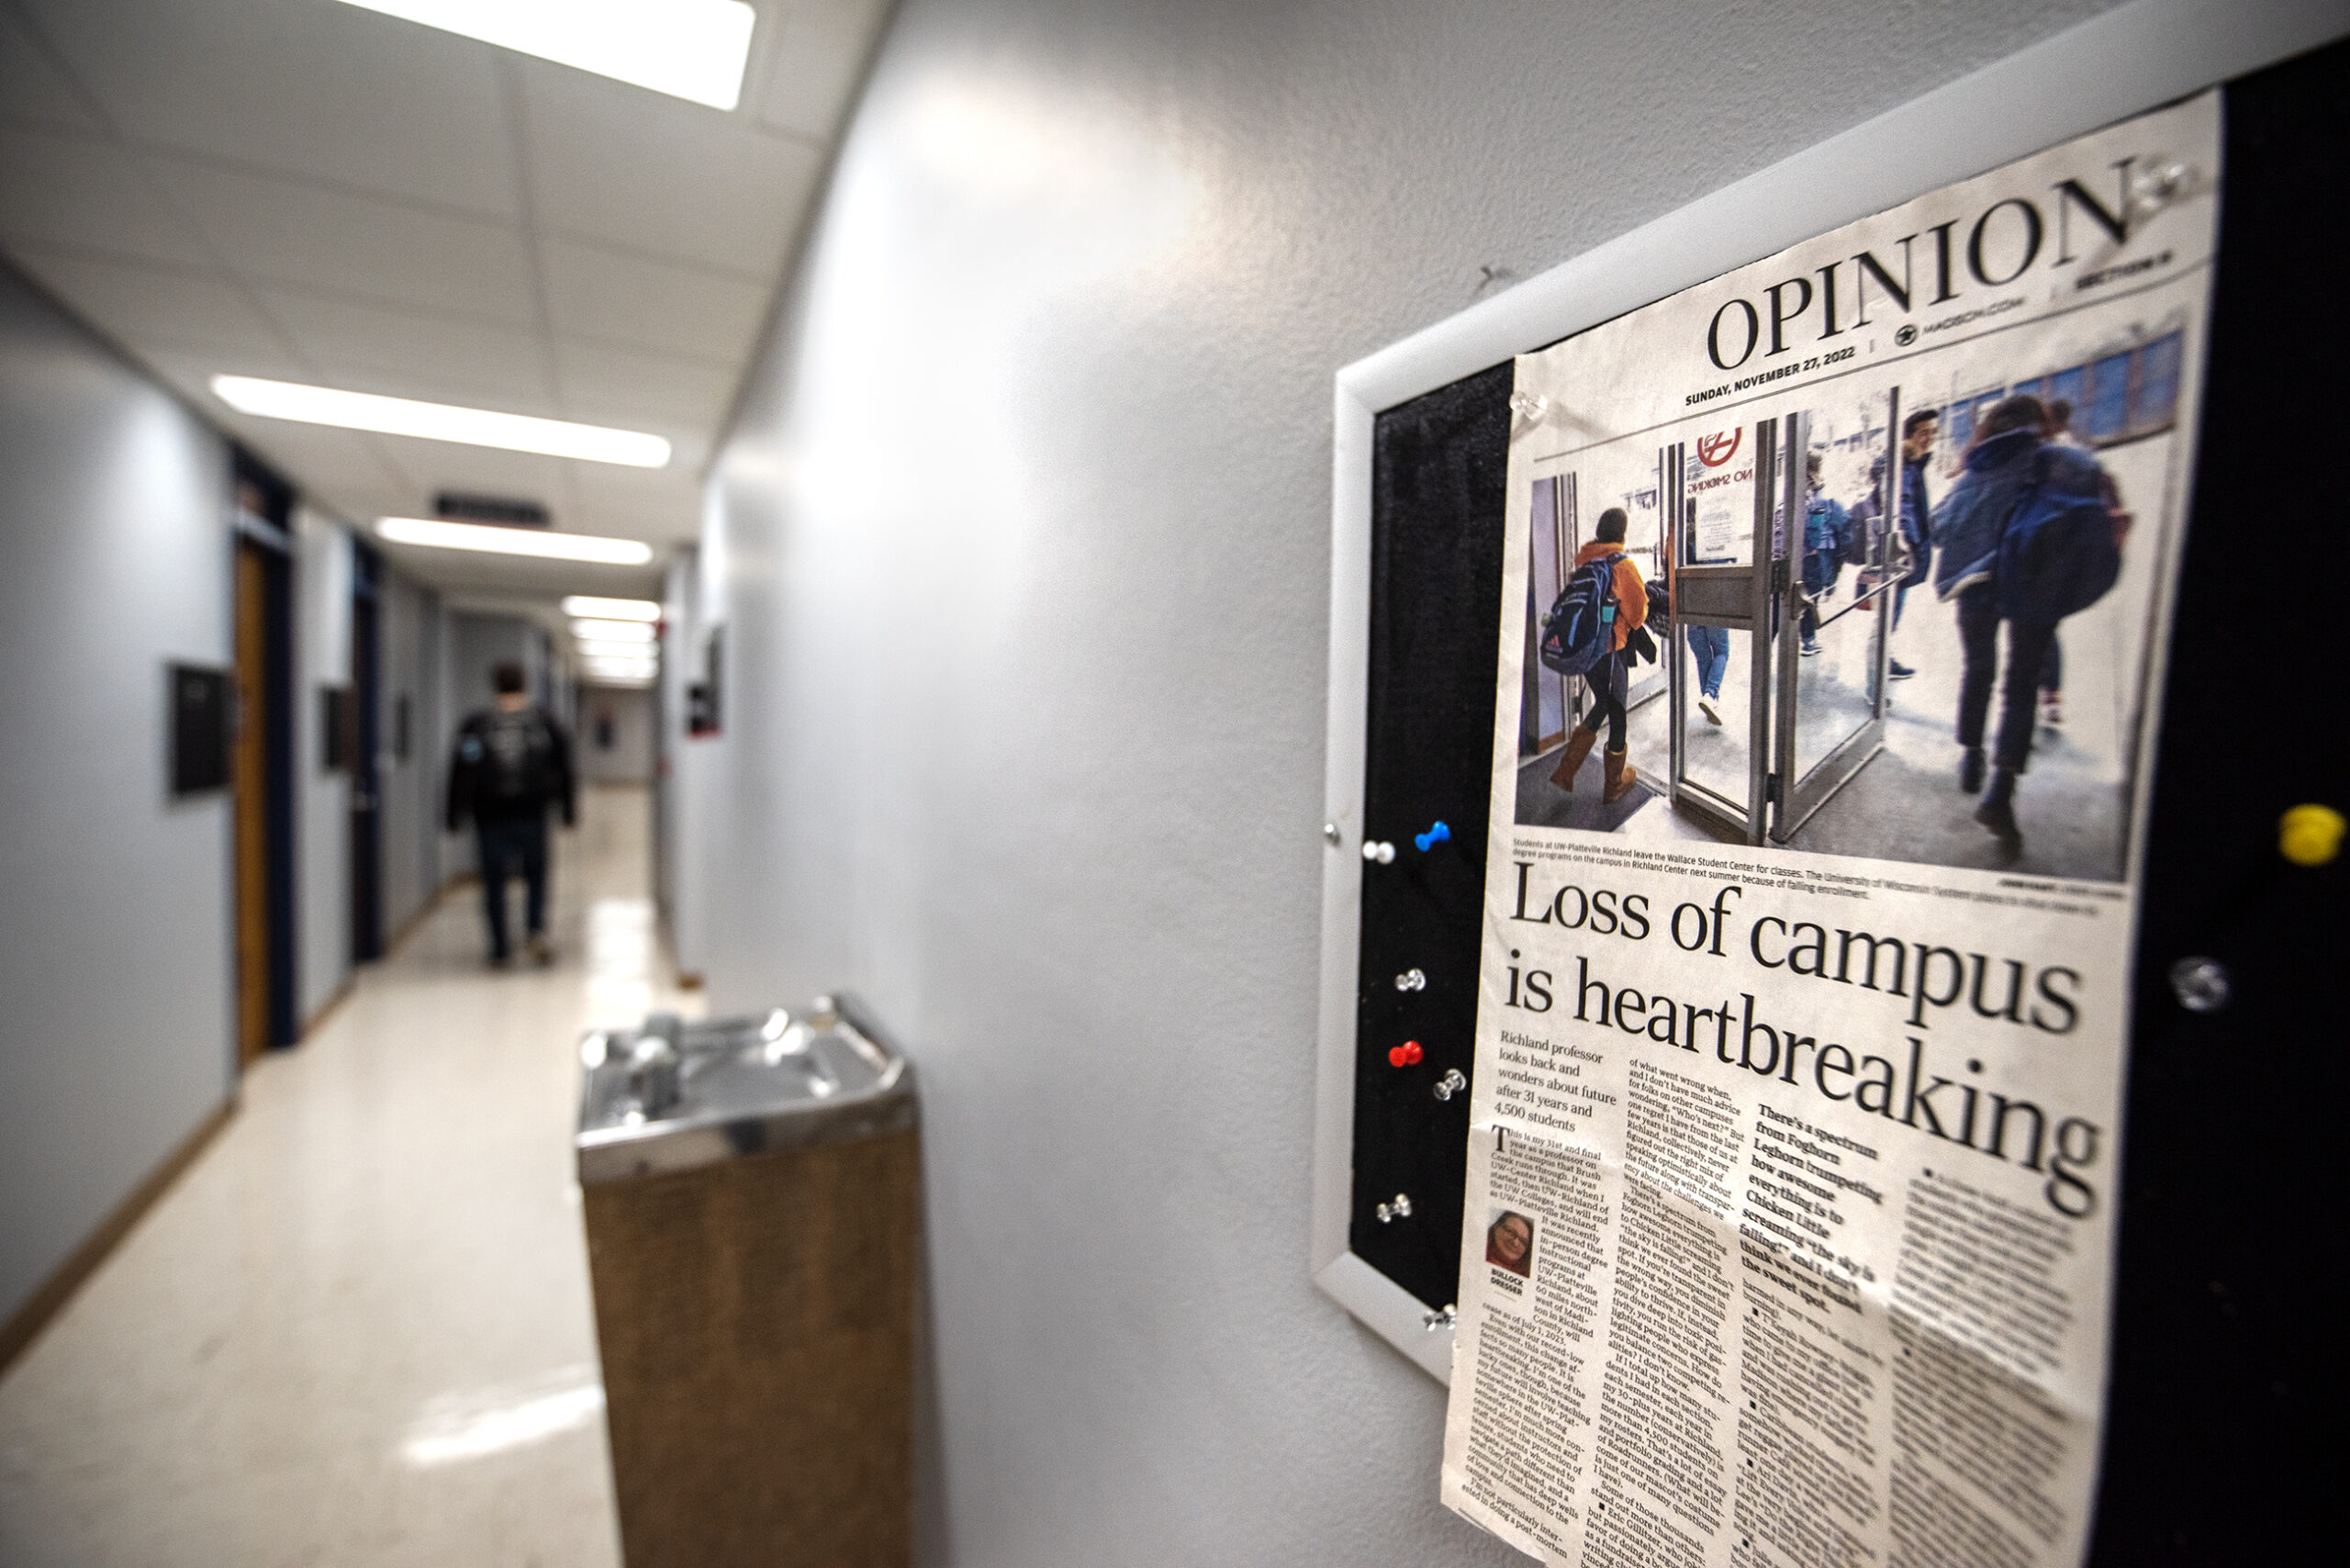 A newspaper is pinned to a bulletin board in a hallway. A headline says "Loss of campus is heartbreaking."